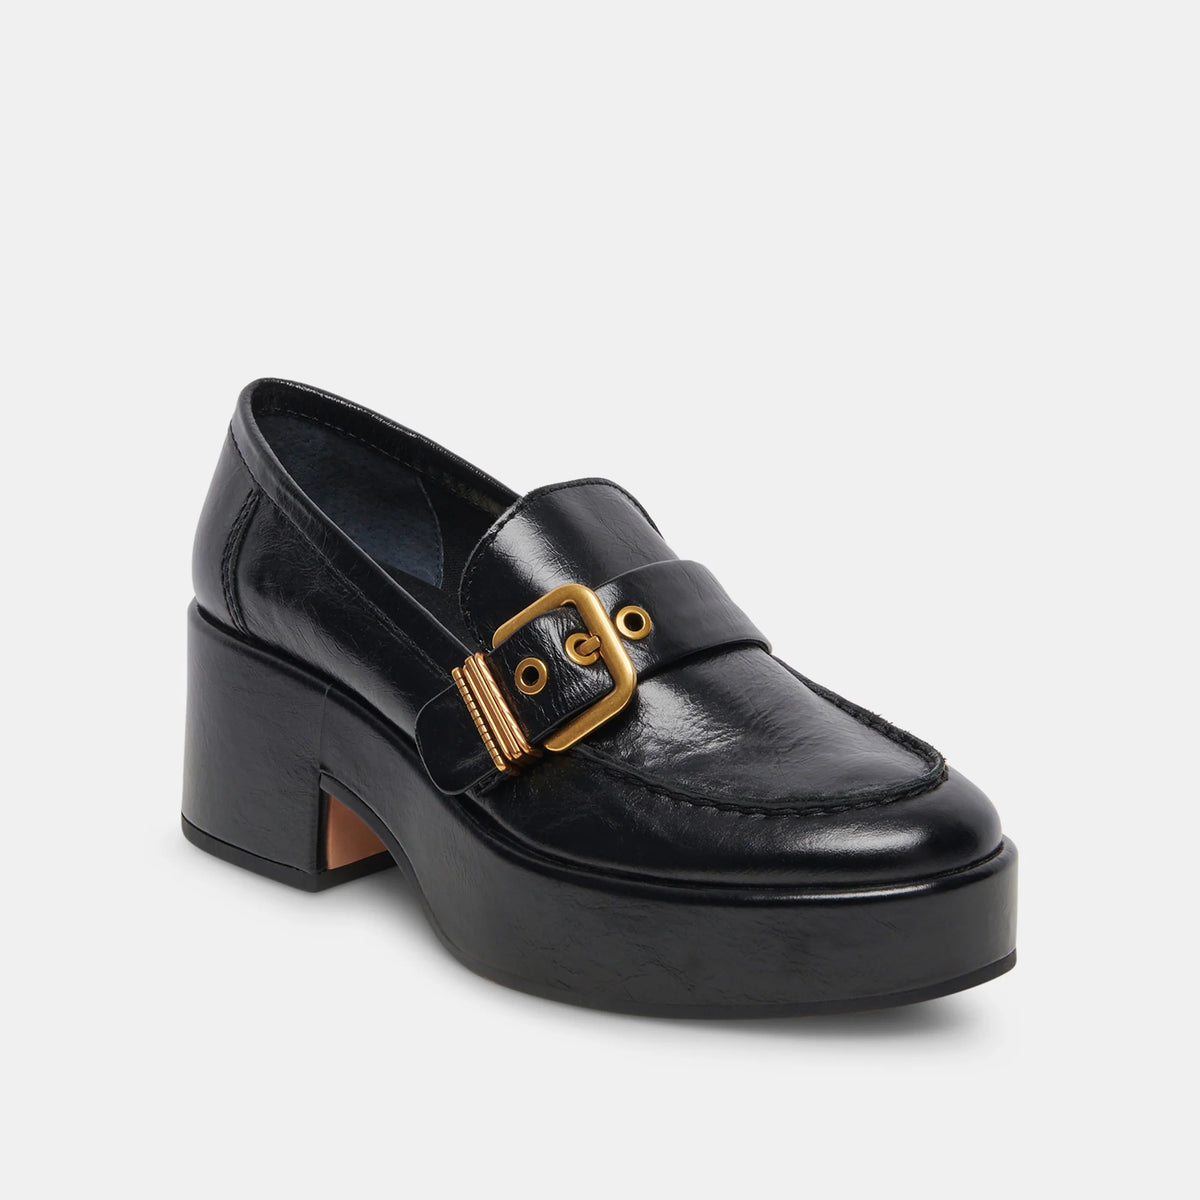 Yonder Loafers